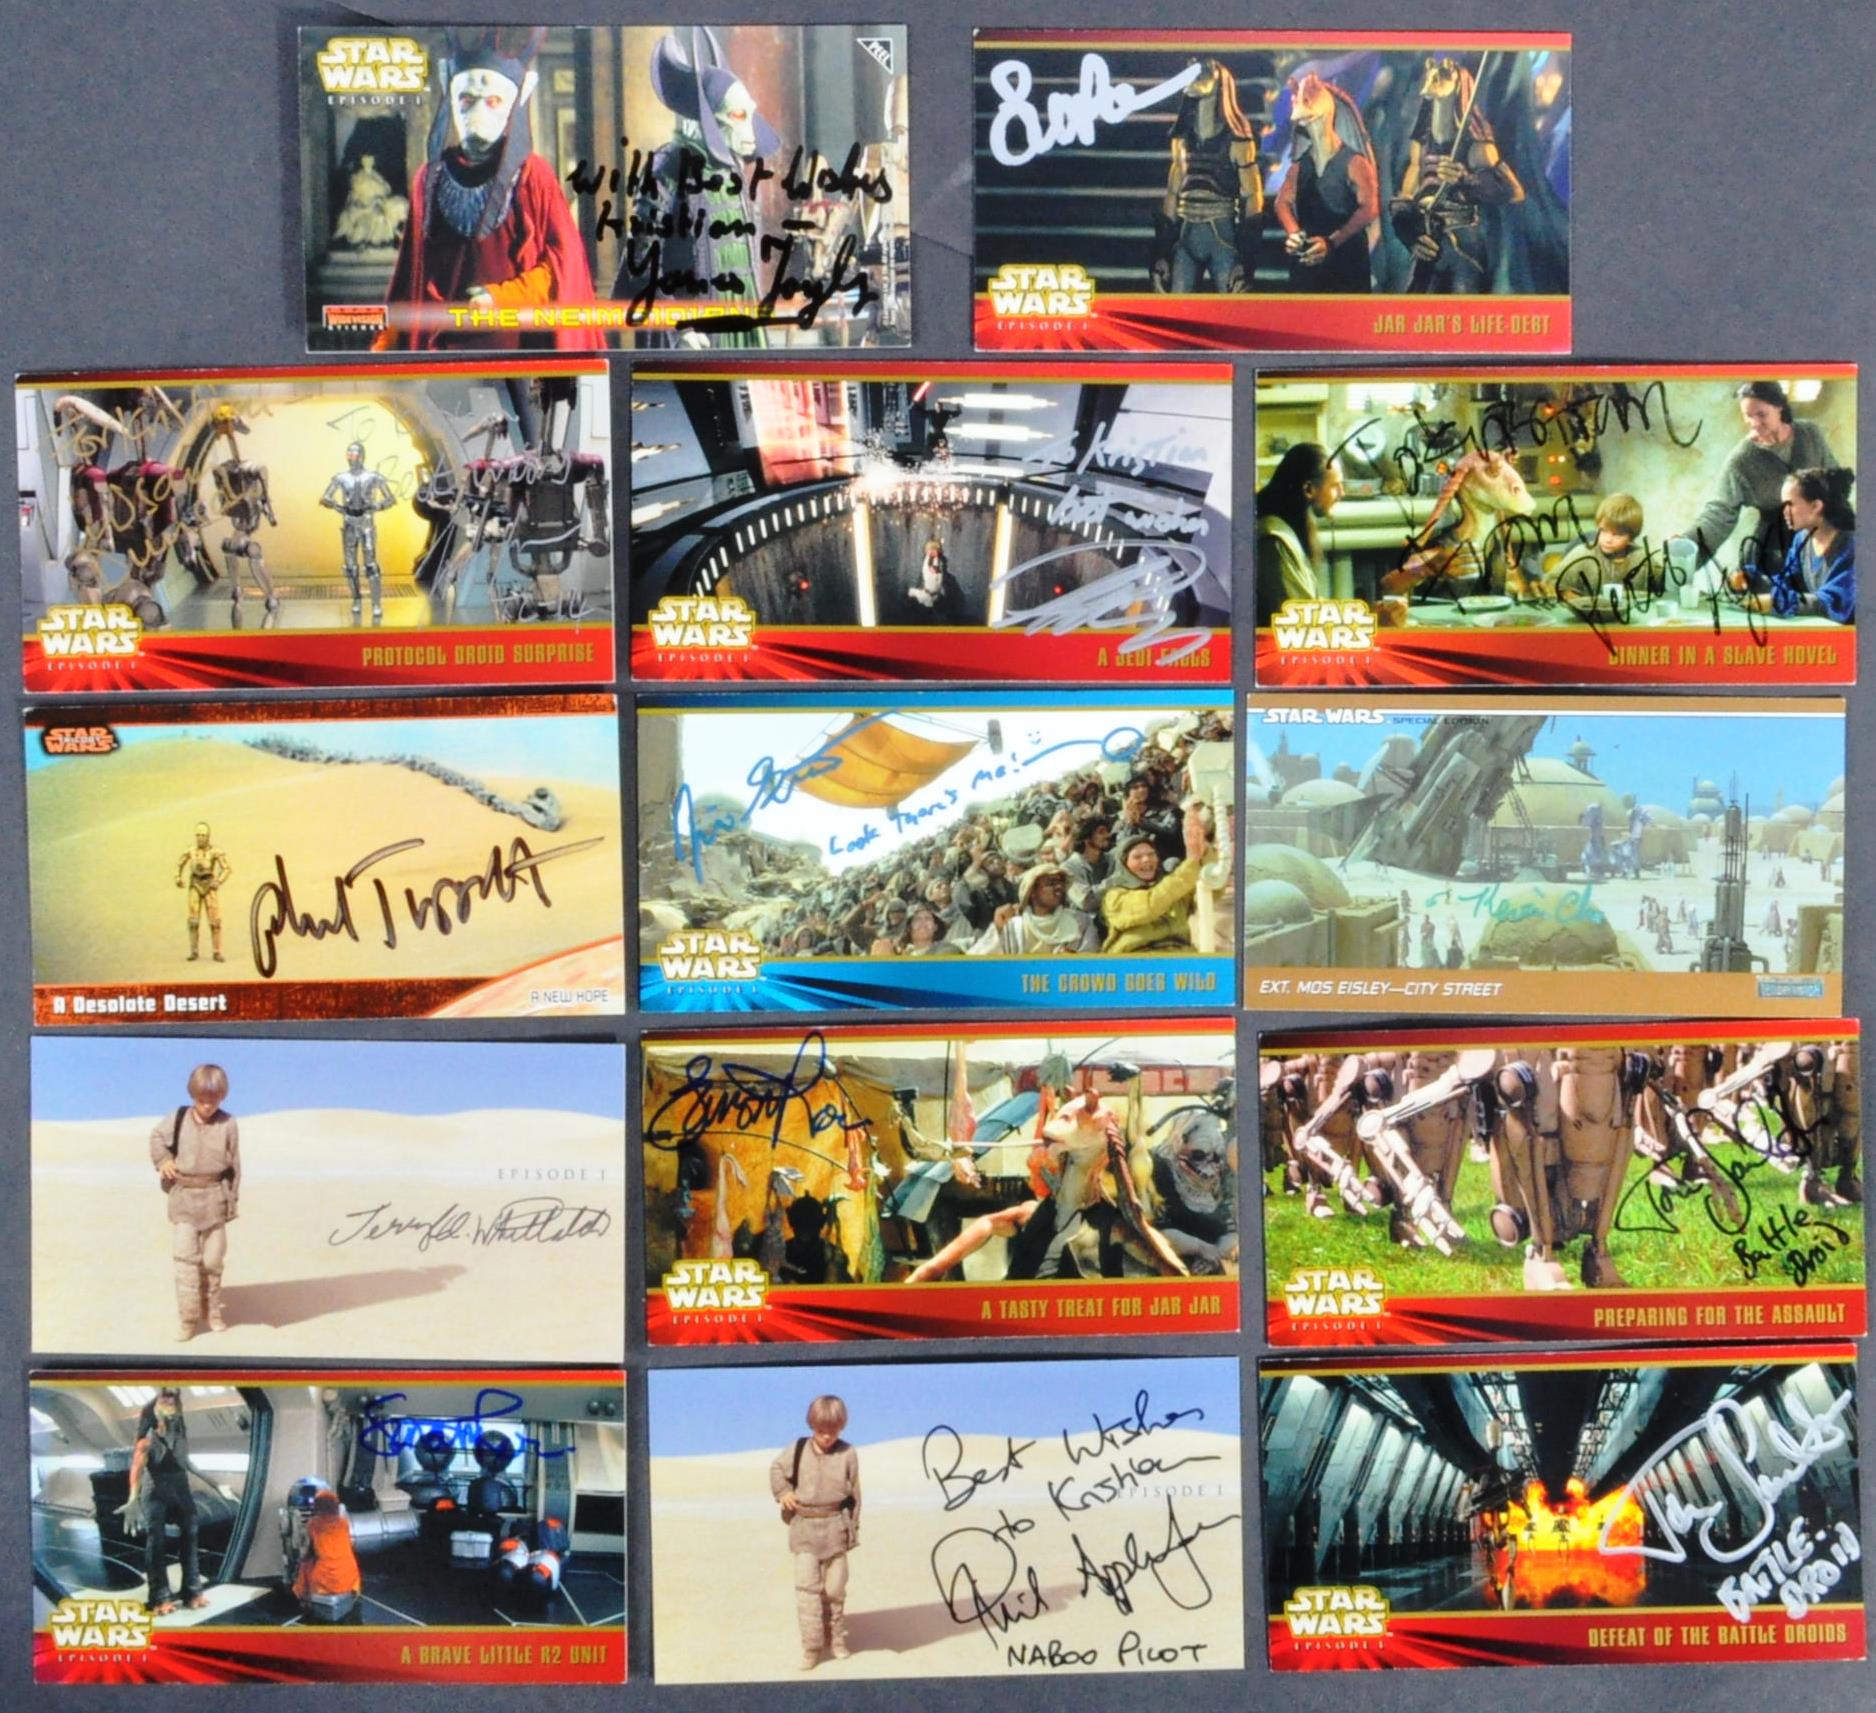 STAR WARS - THE PHANTOM MENACE - COLLECTION OF SIGNED TRADING CARDS - Image 2 of 5